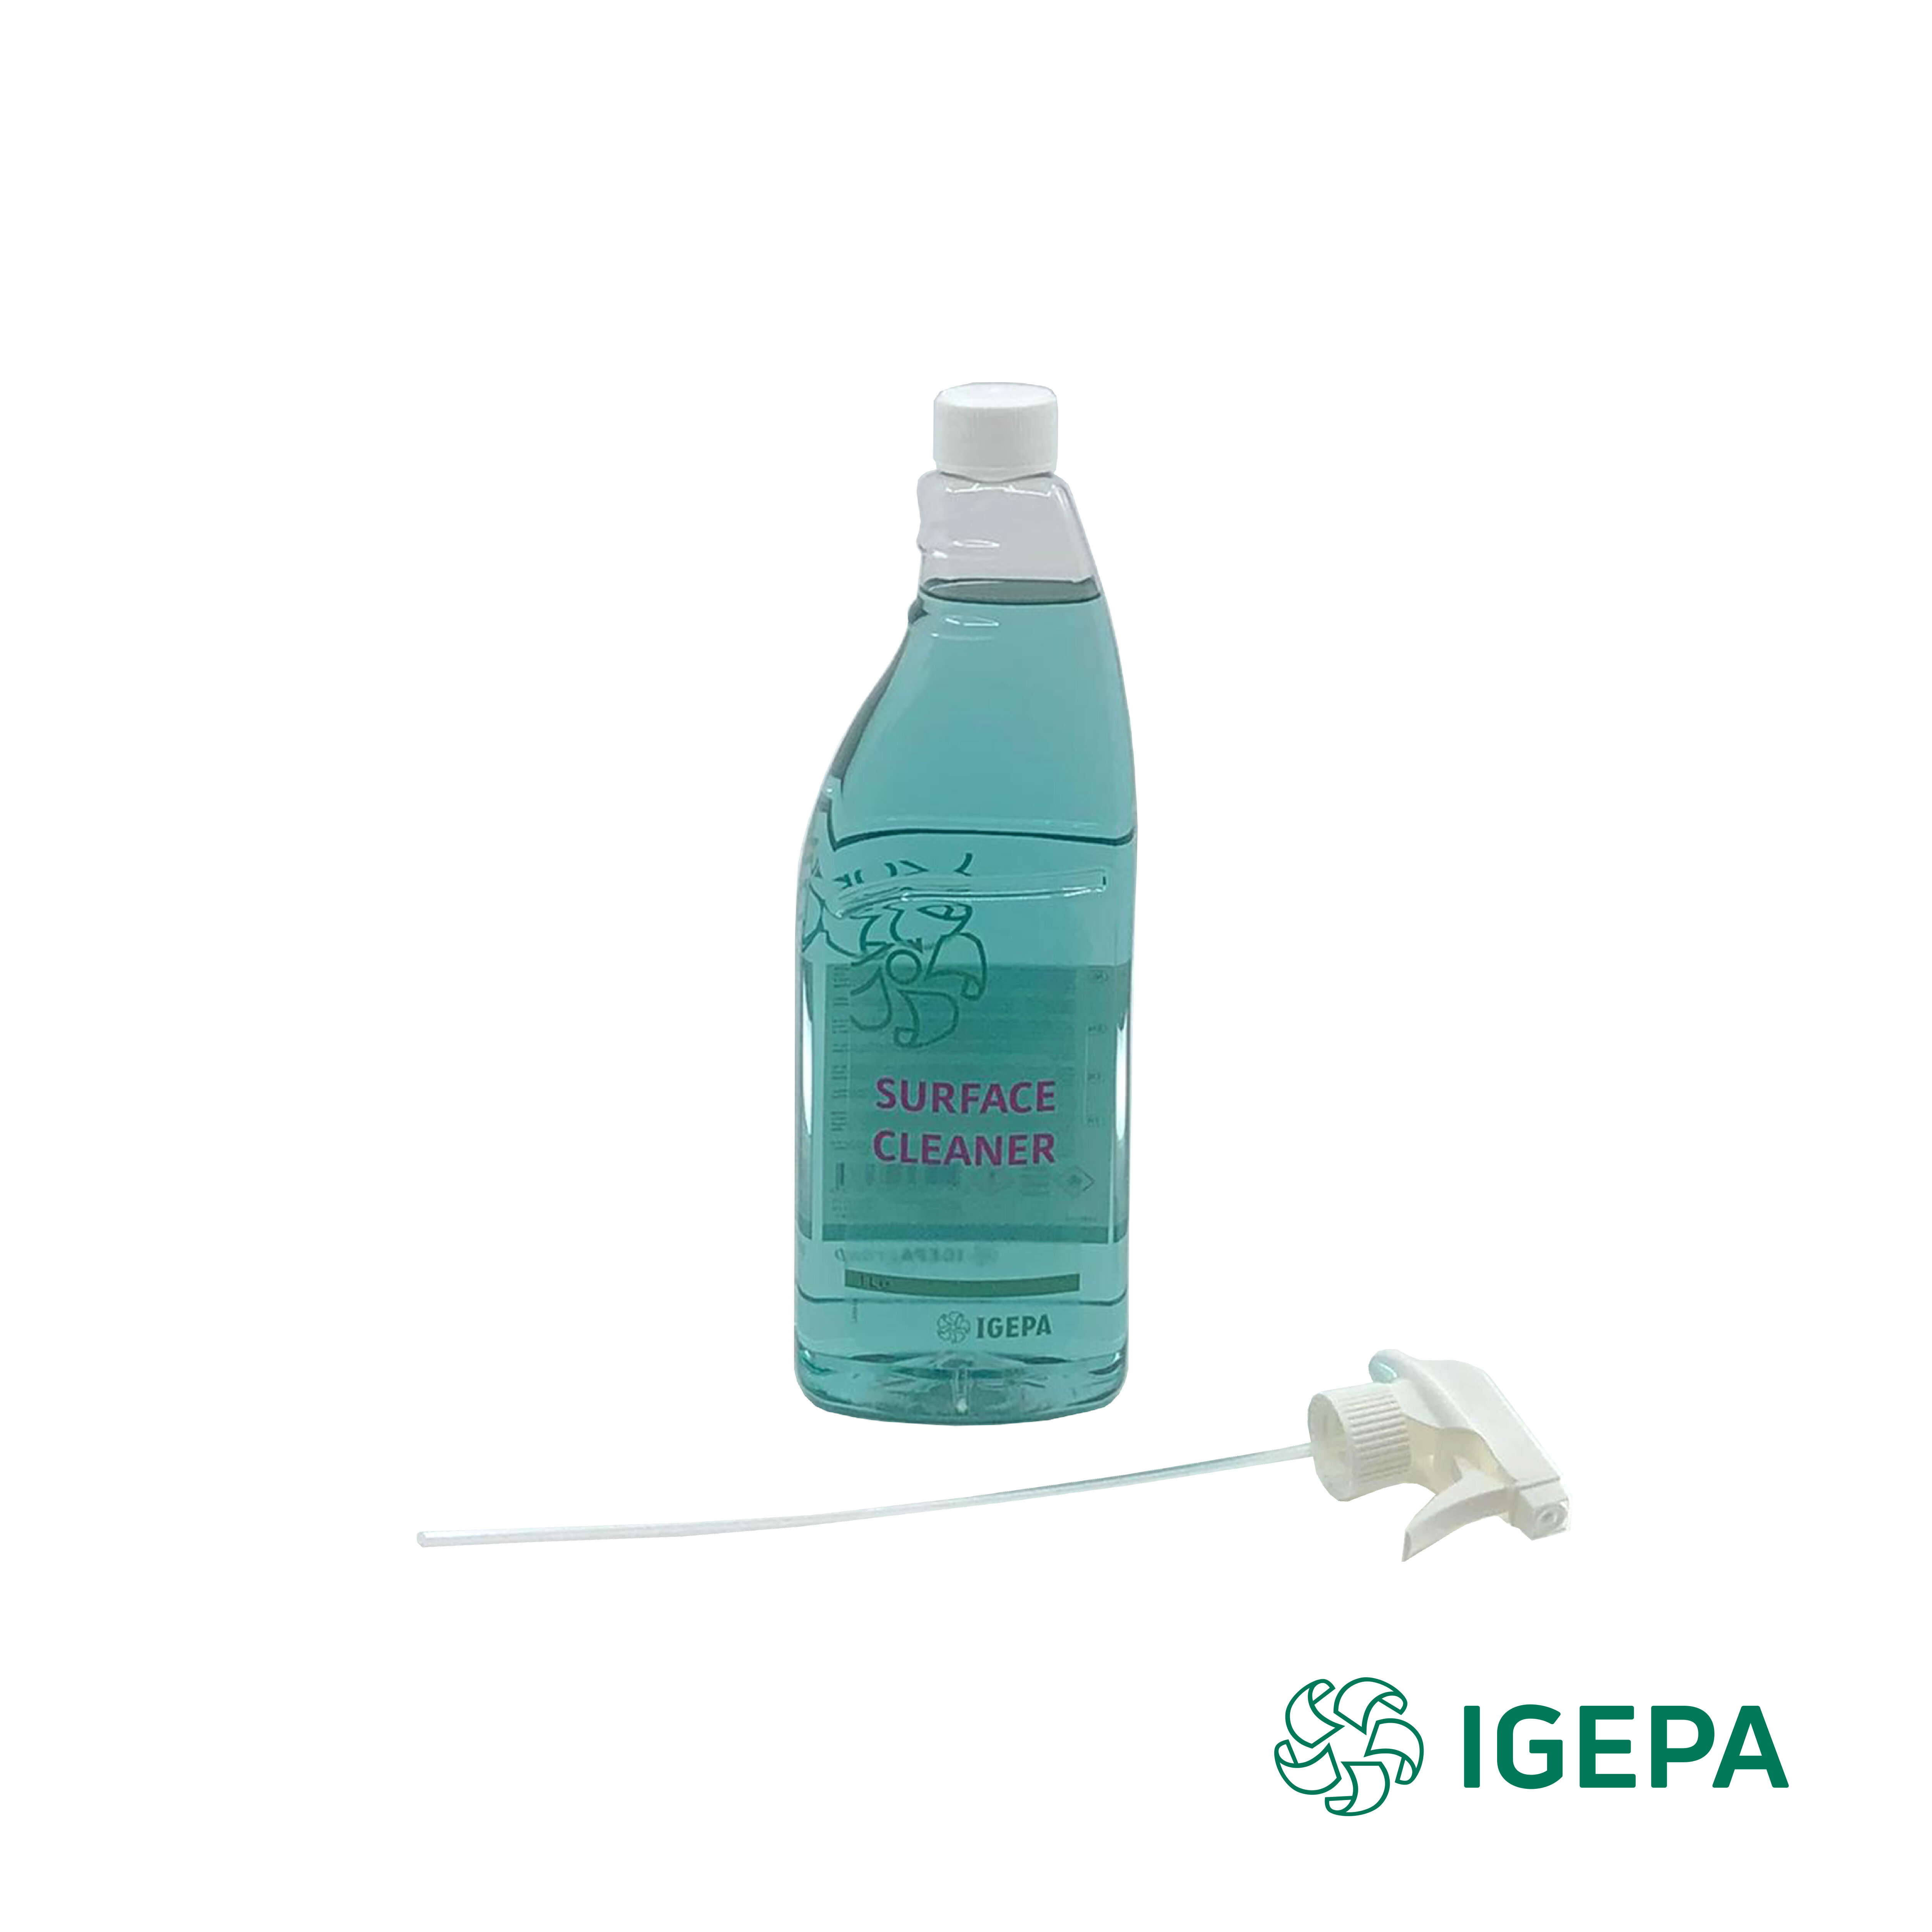 Igepa Surfacecleaner, 12X 0,75 L